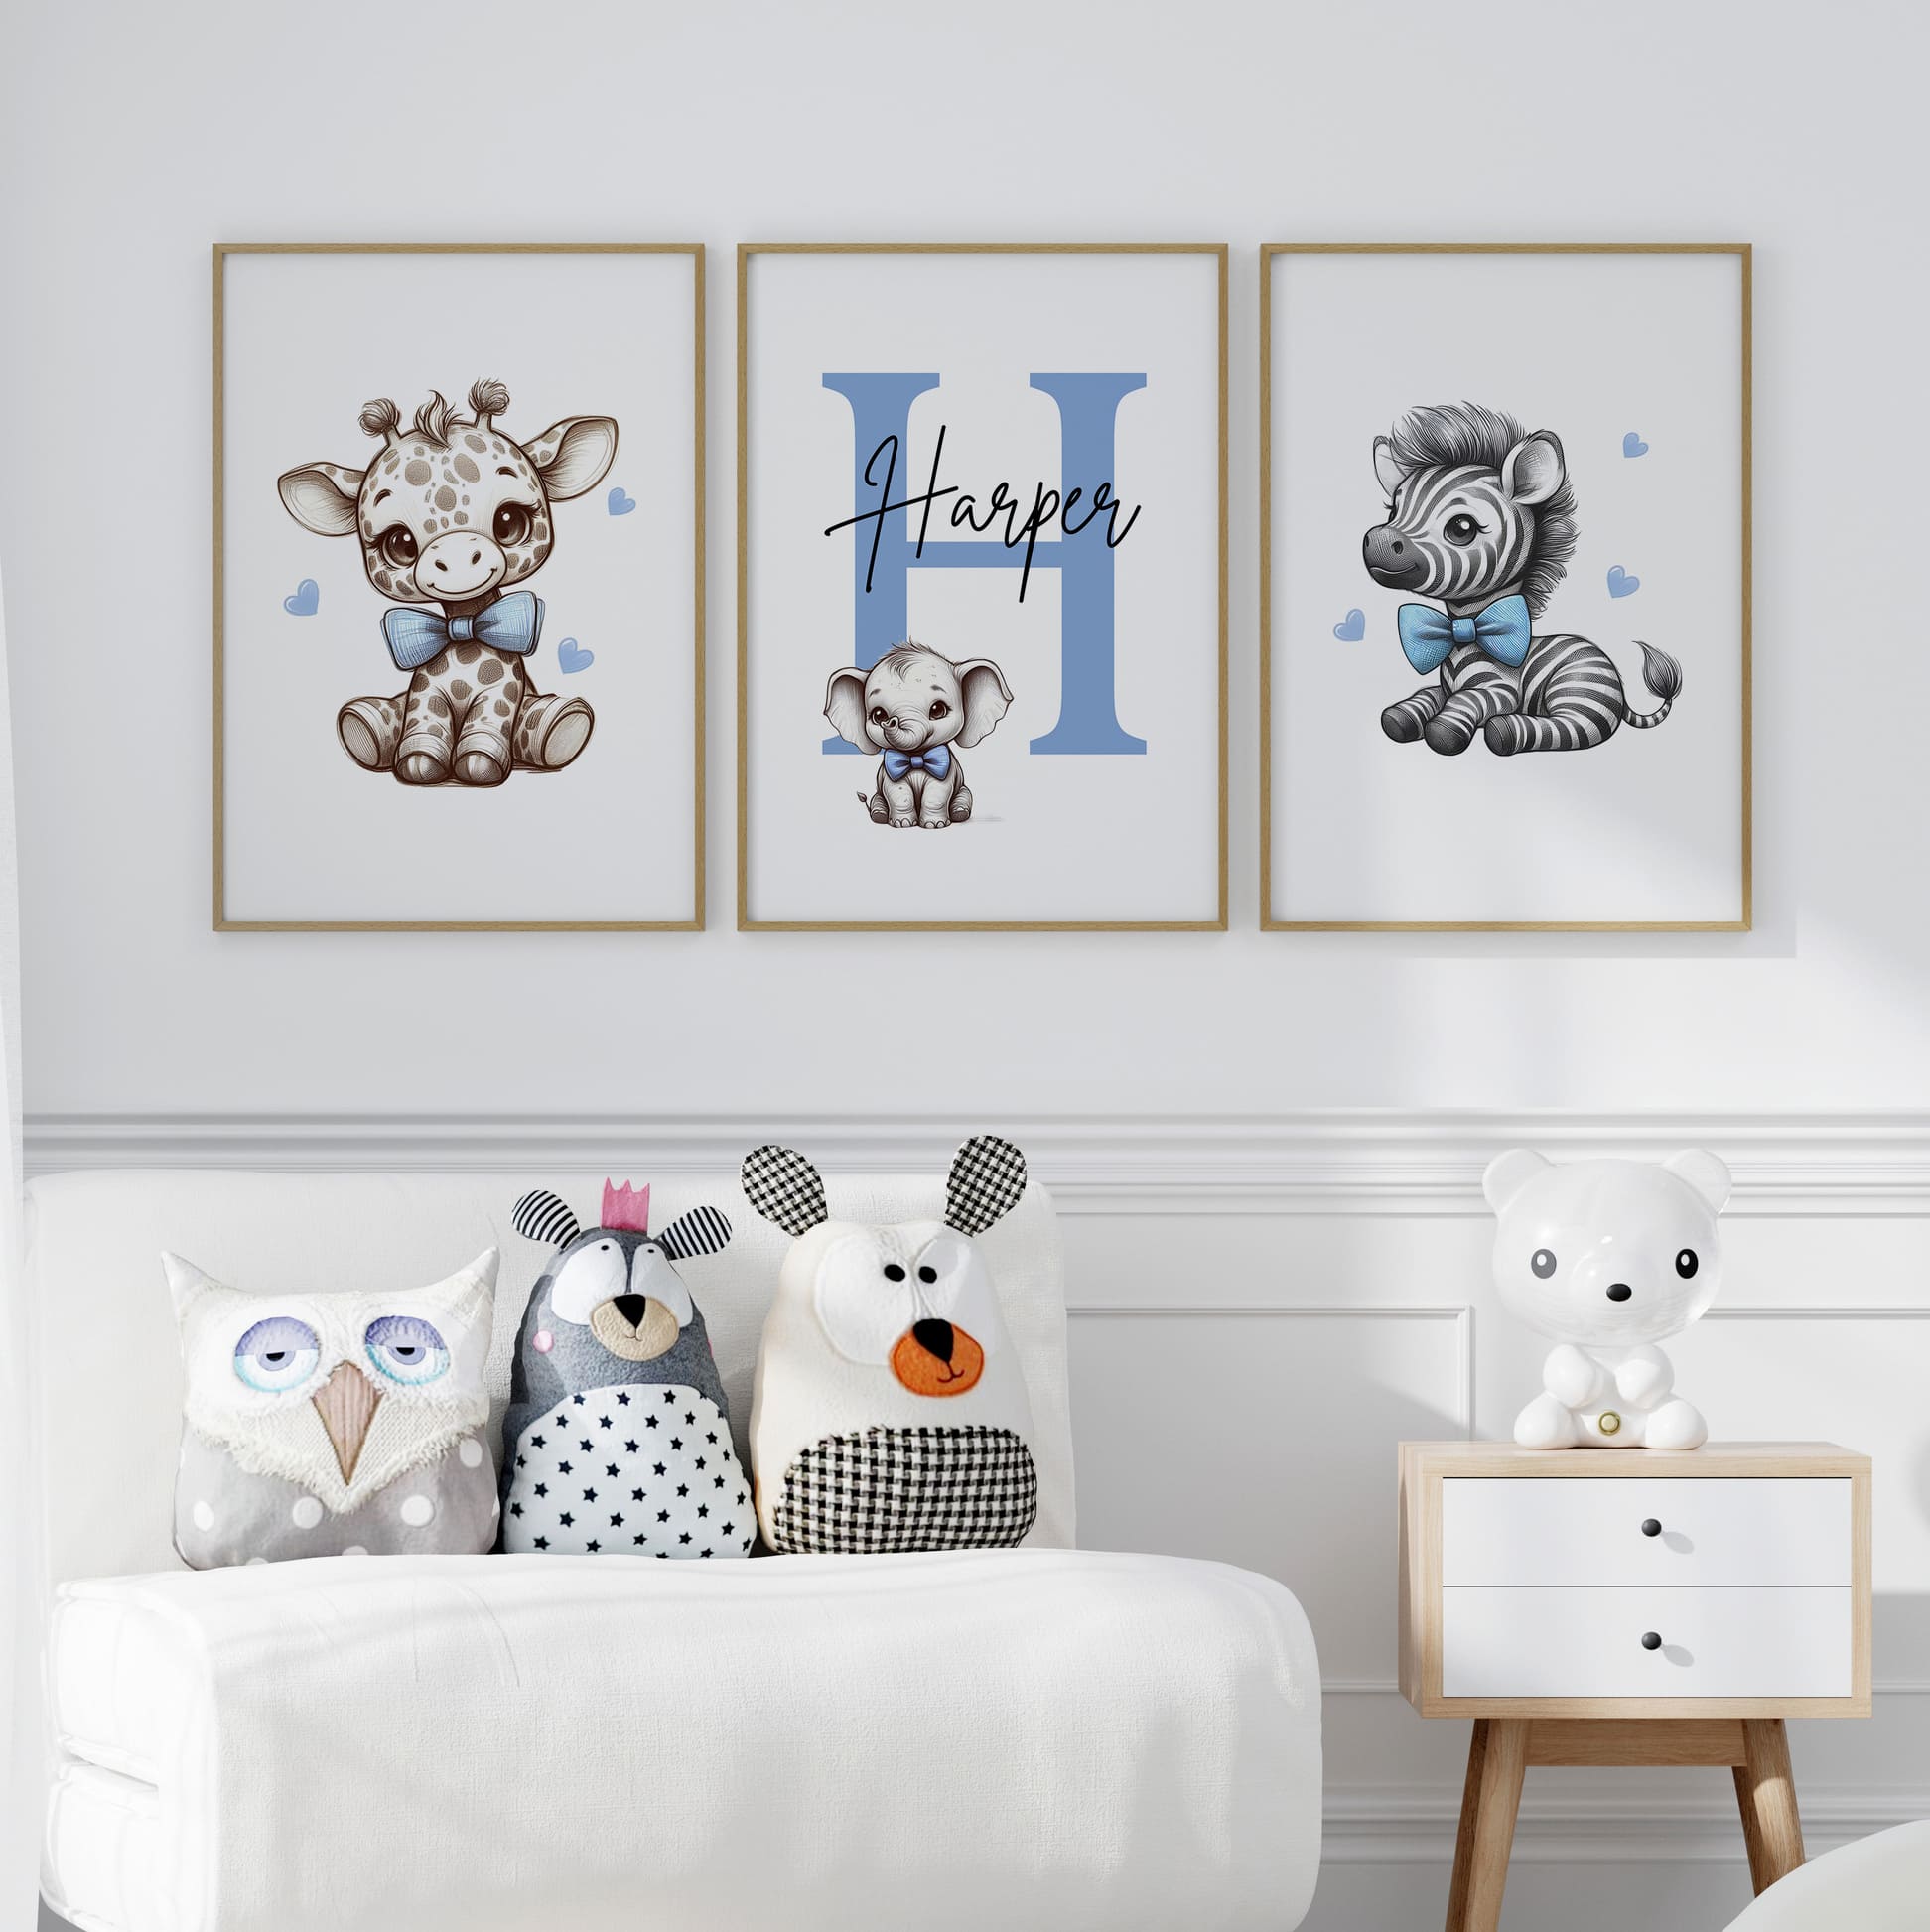 Set of three A4 prints in the style of pencil drawings. Each print features a cartoon baby giraffe, baby elephant, and baby zebra in black and white. They all wear a blue bow, with a few small blue hearts in the background. The middle image contains the elephant, which is smaller than the other two images. In the background, there is a large initial with a personalised name in black.